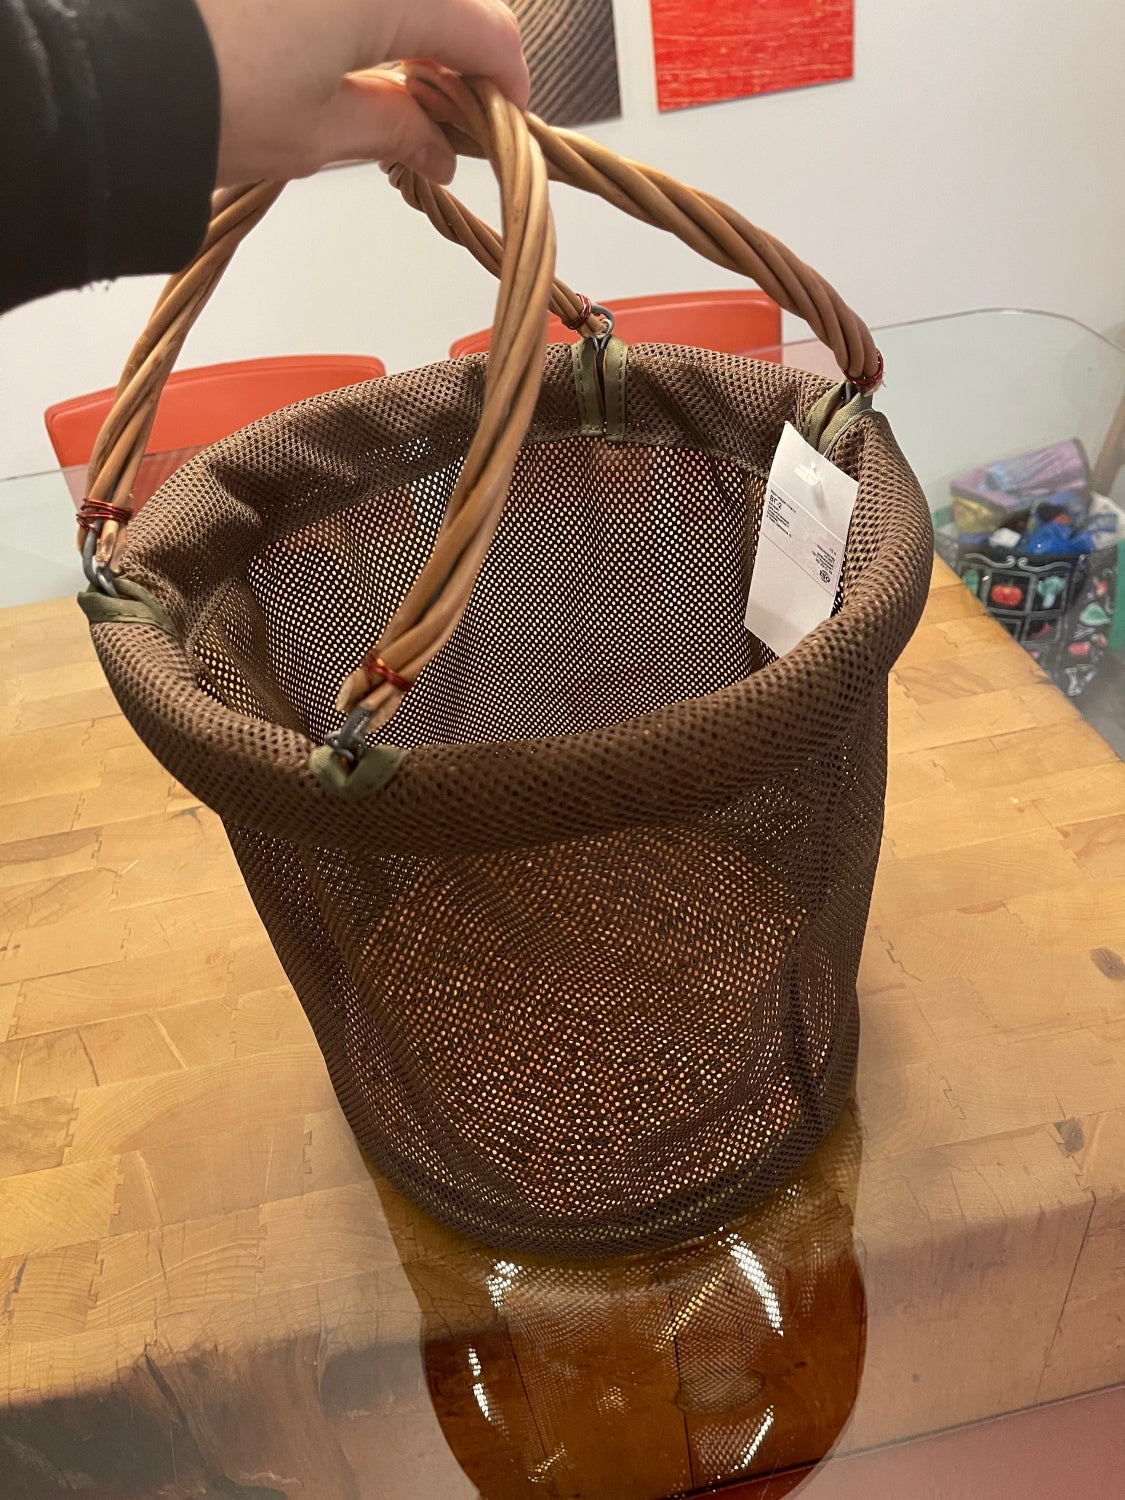 Collapsible Mesh Basket with Wicker Handles and Bottom